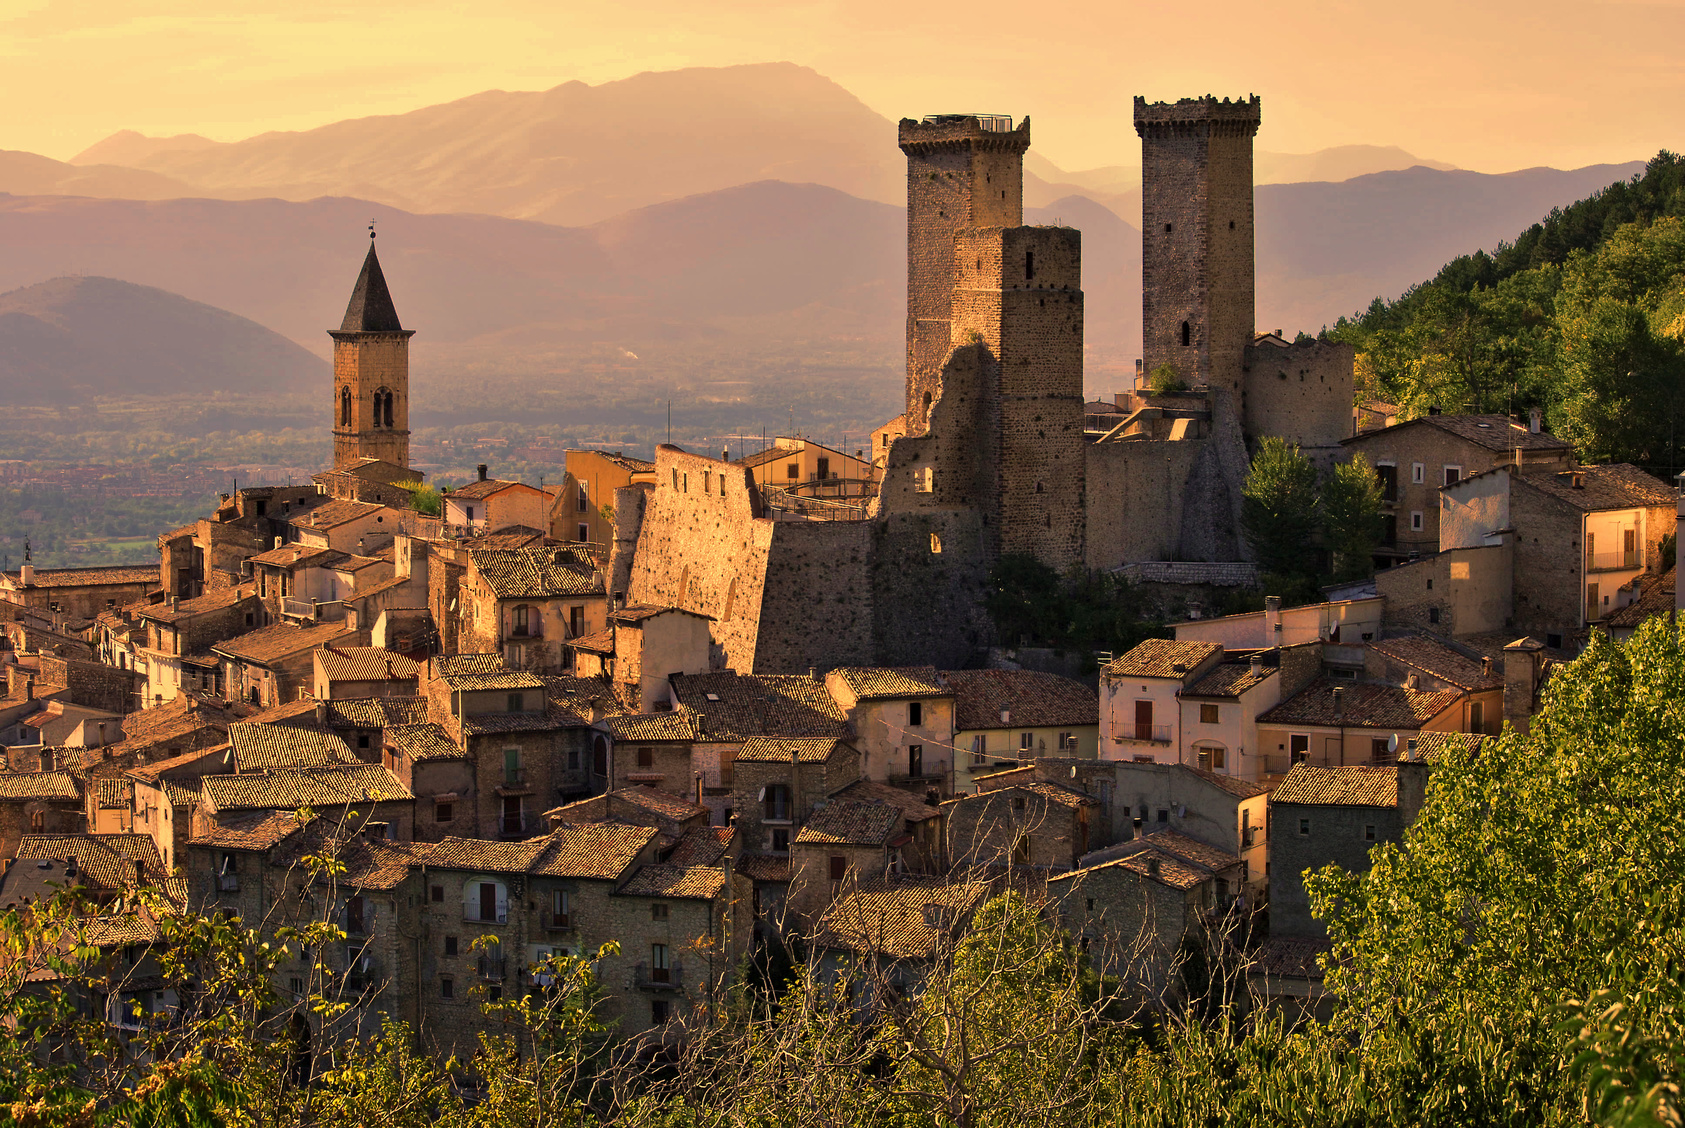 Castle Cantelmo-Caldora - 15 of the Prettiest Towns and Villages in Italy